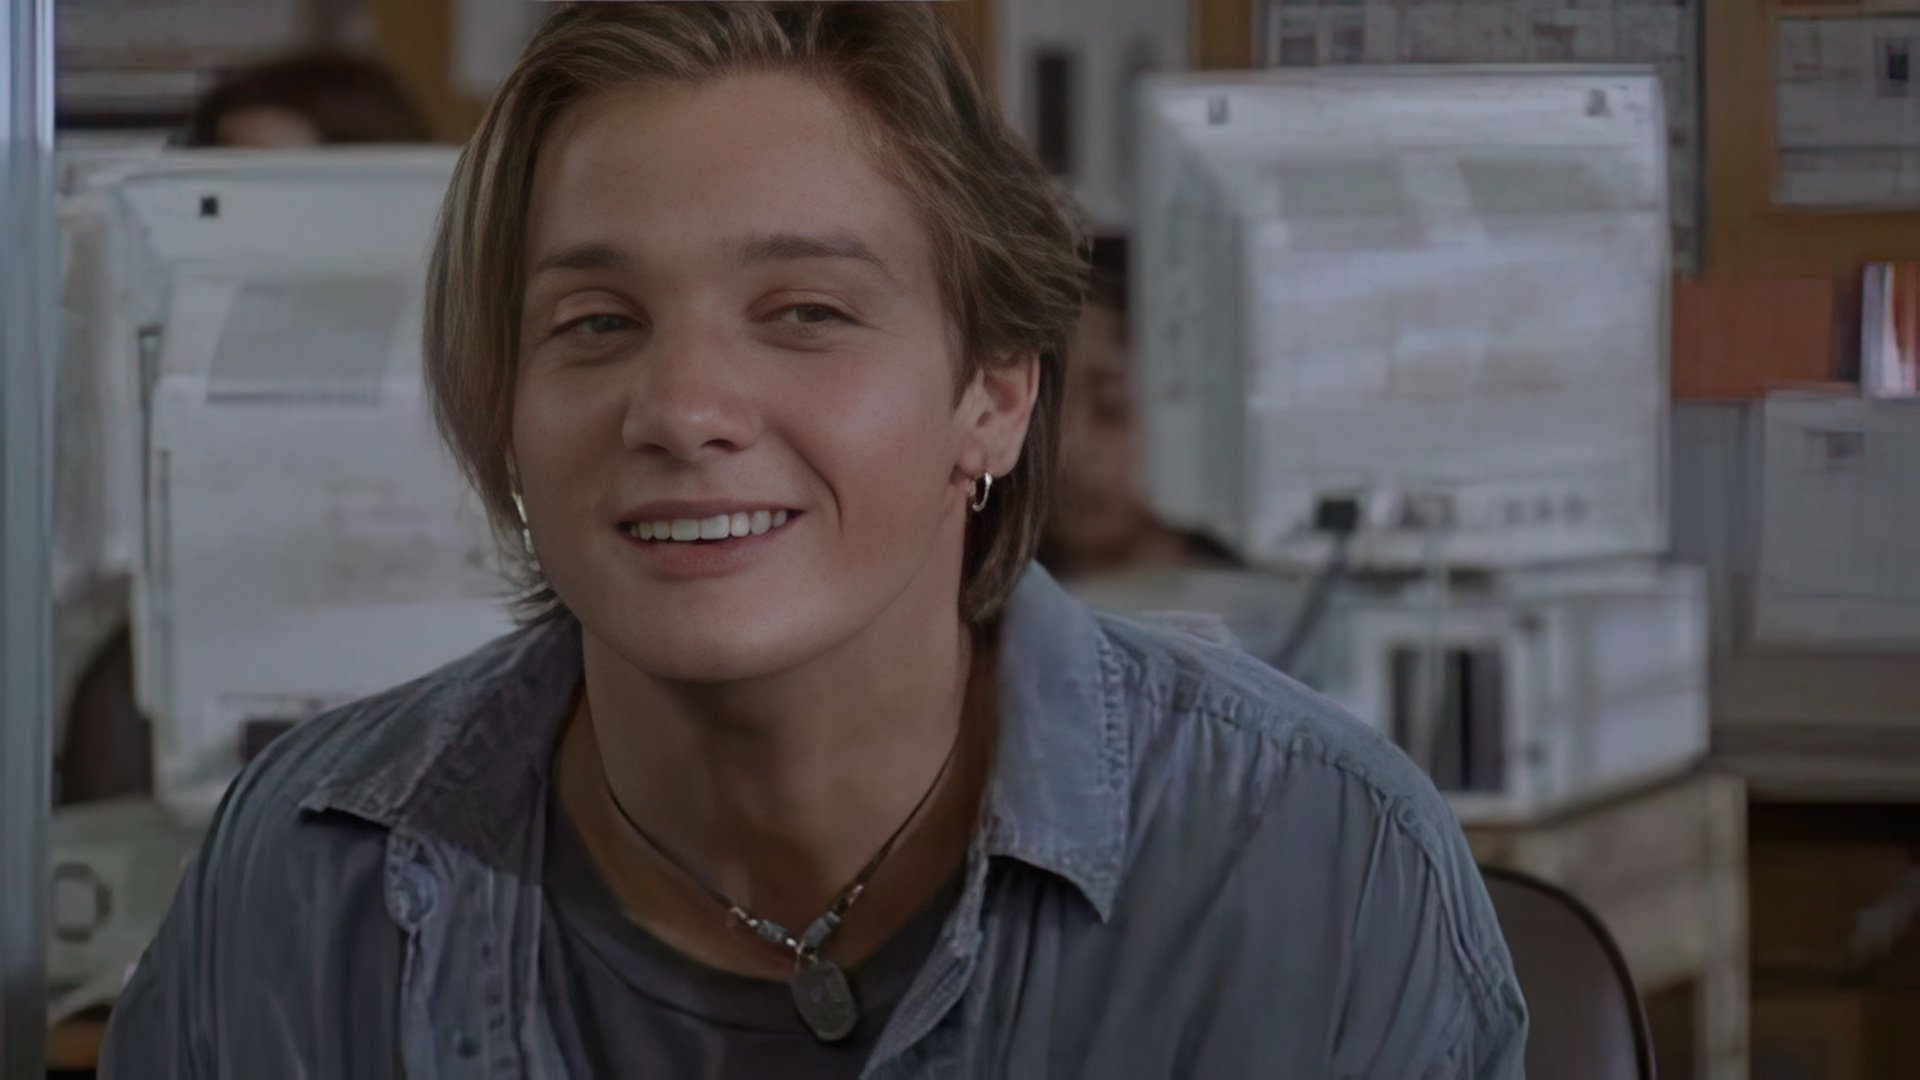 Young Jeremy Renner in his first movie («National Lampoon’s Senior Trip»)